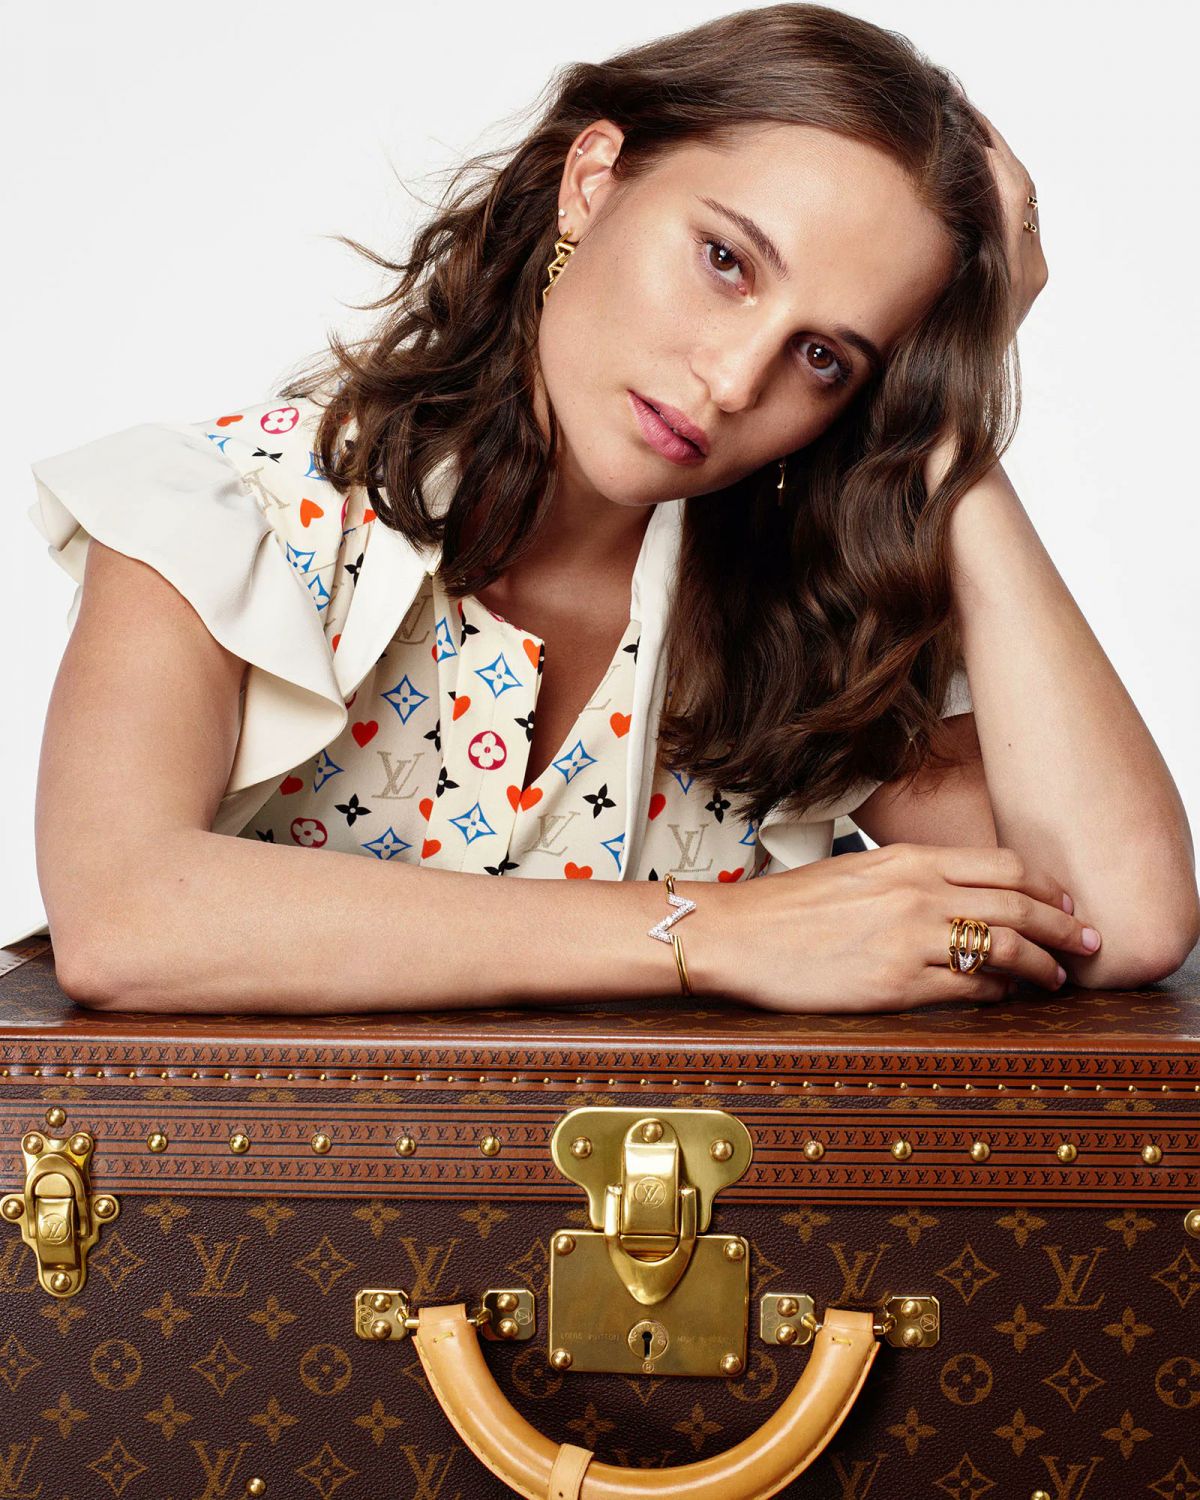 Louis Vuitton's Hot Stamping Service Or Impress Your Initials